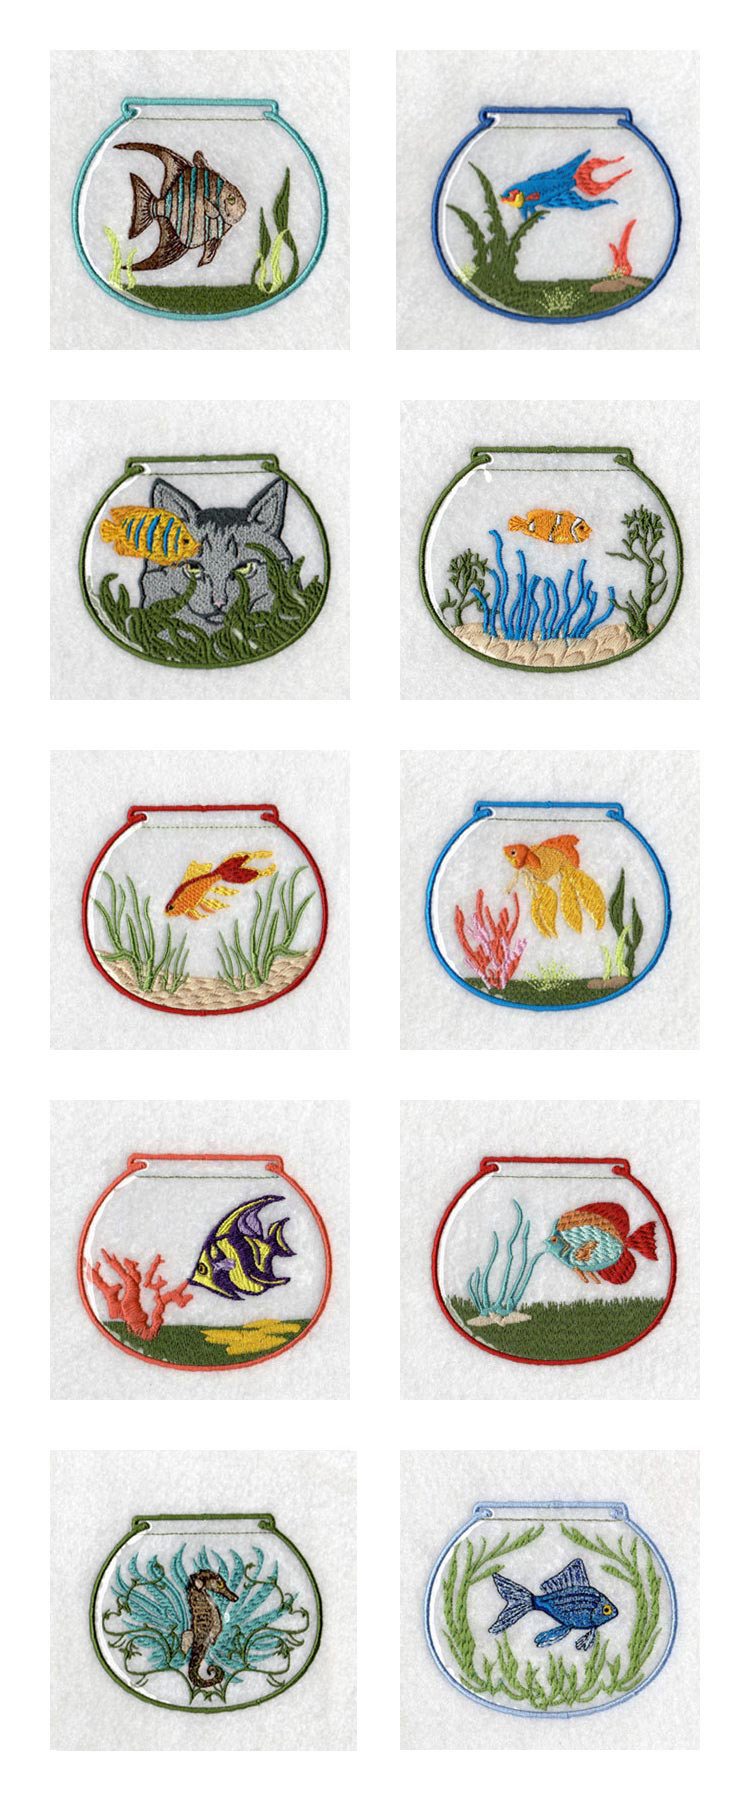 Vinyl Covered Fish Bowls Embroidery Machine Design Details